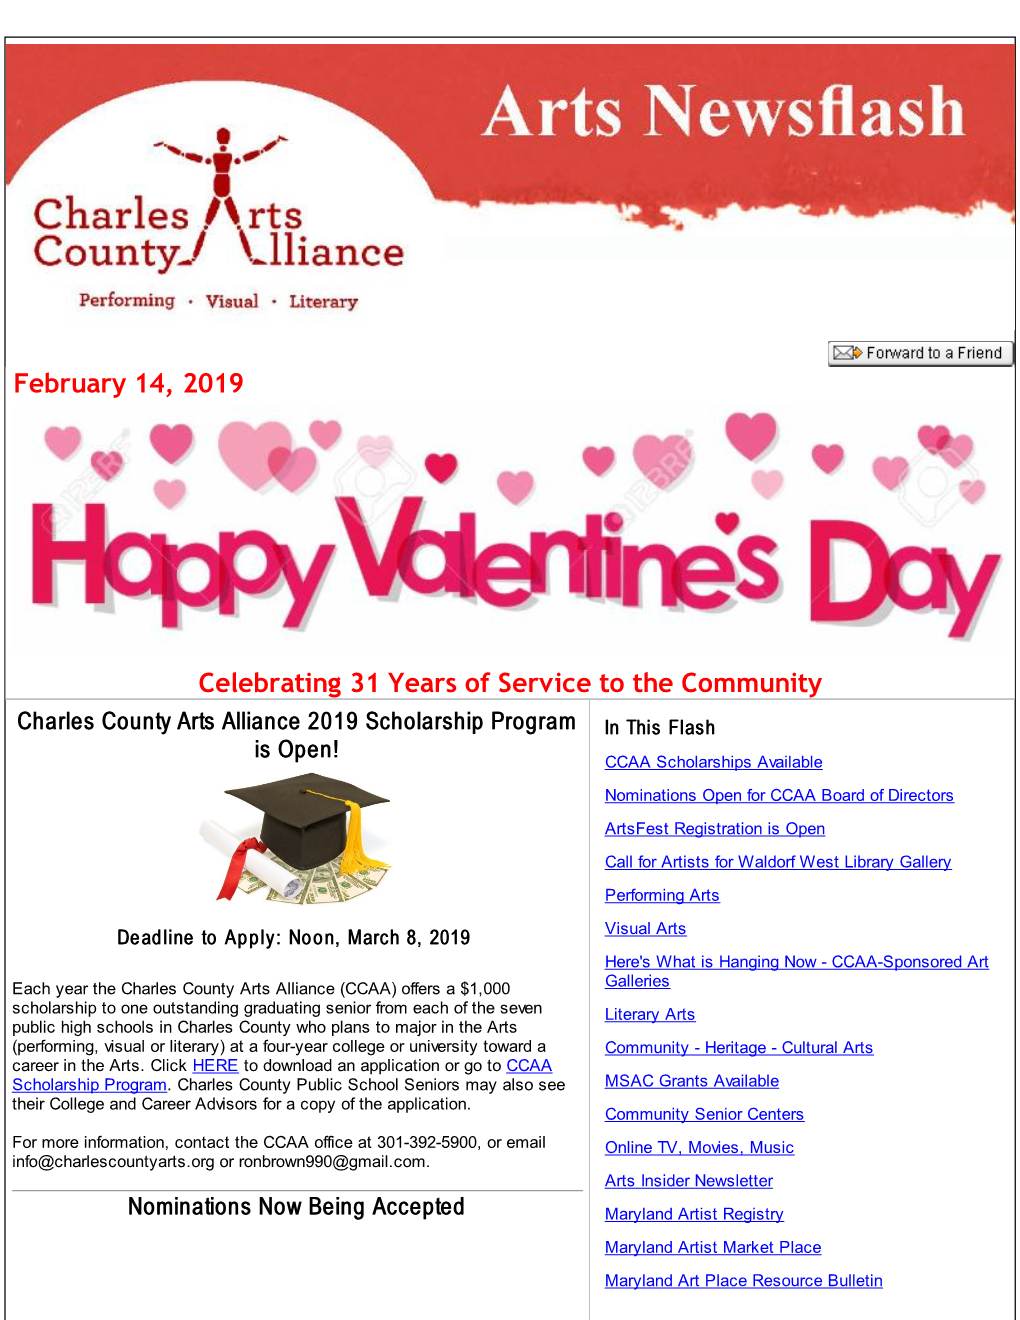 February 14, 2019 Celebrating 31 Years of Service to the Community